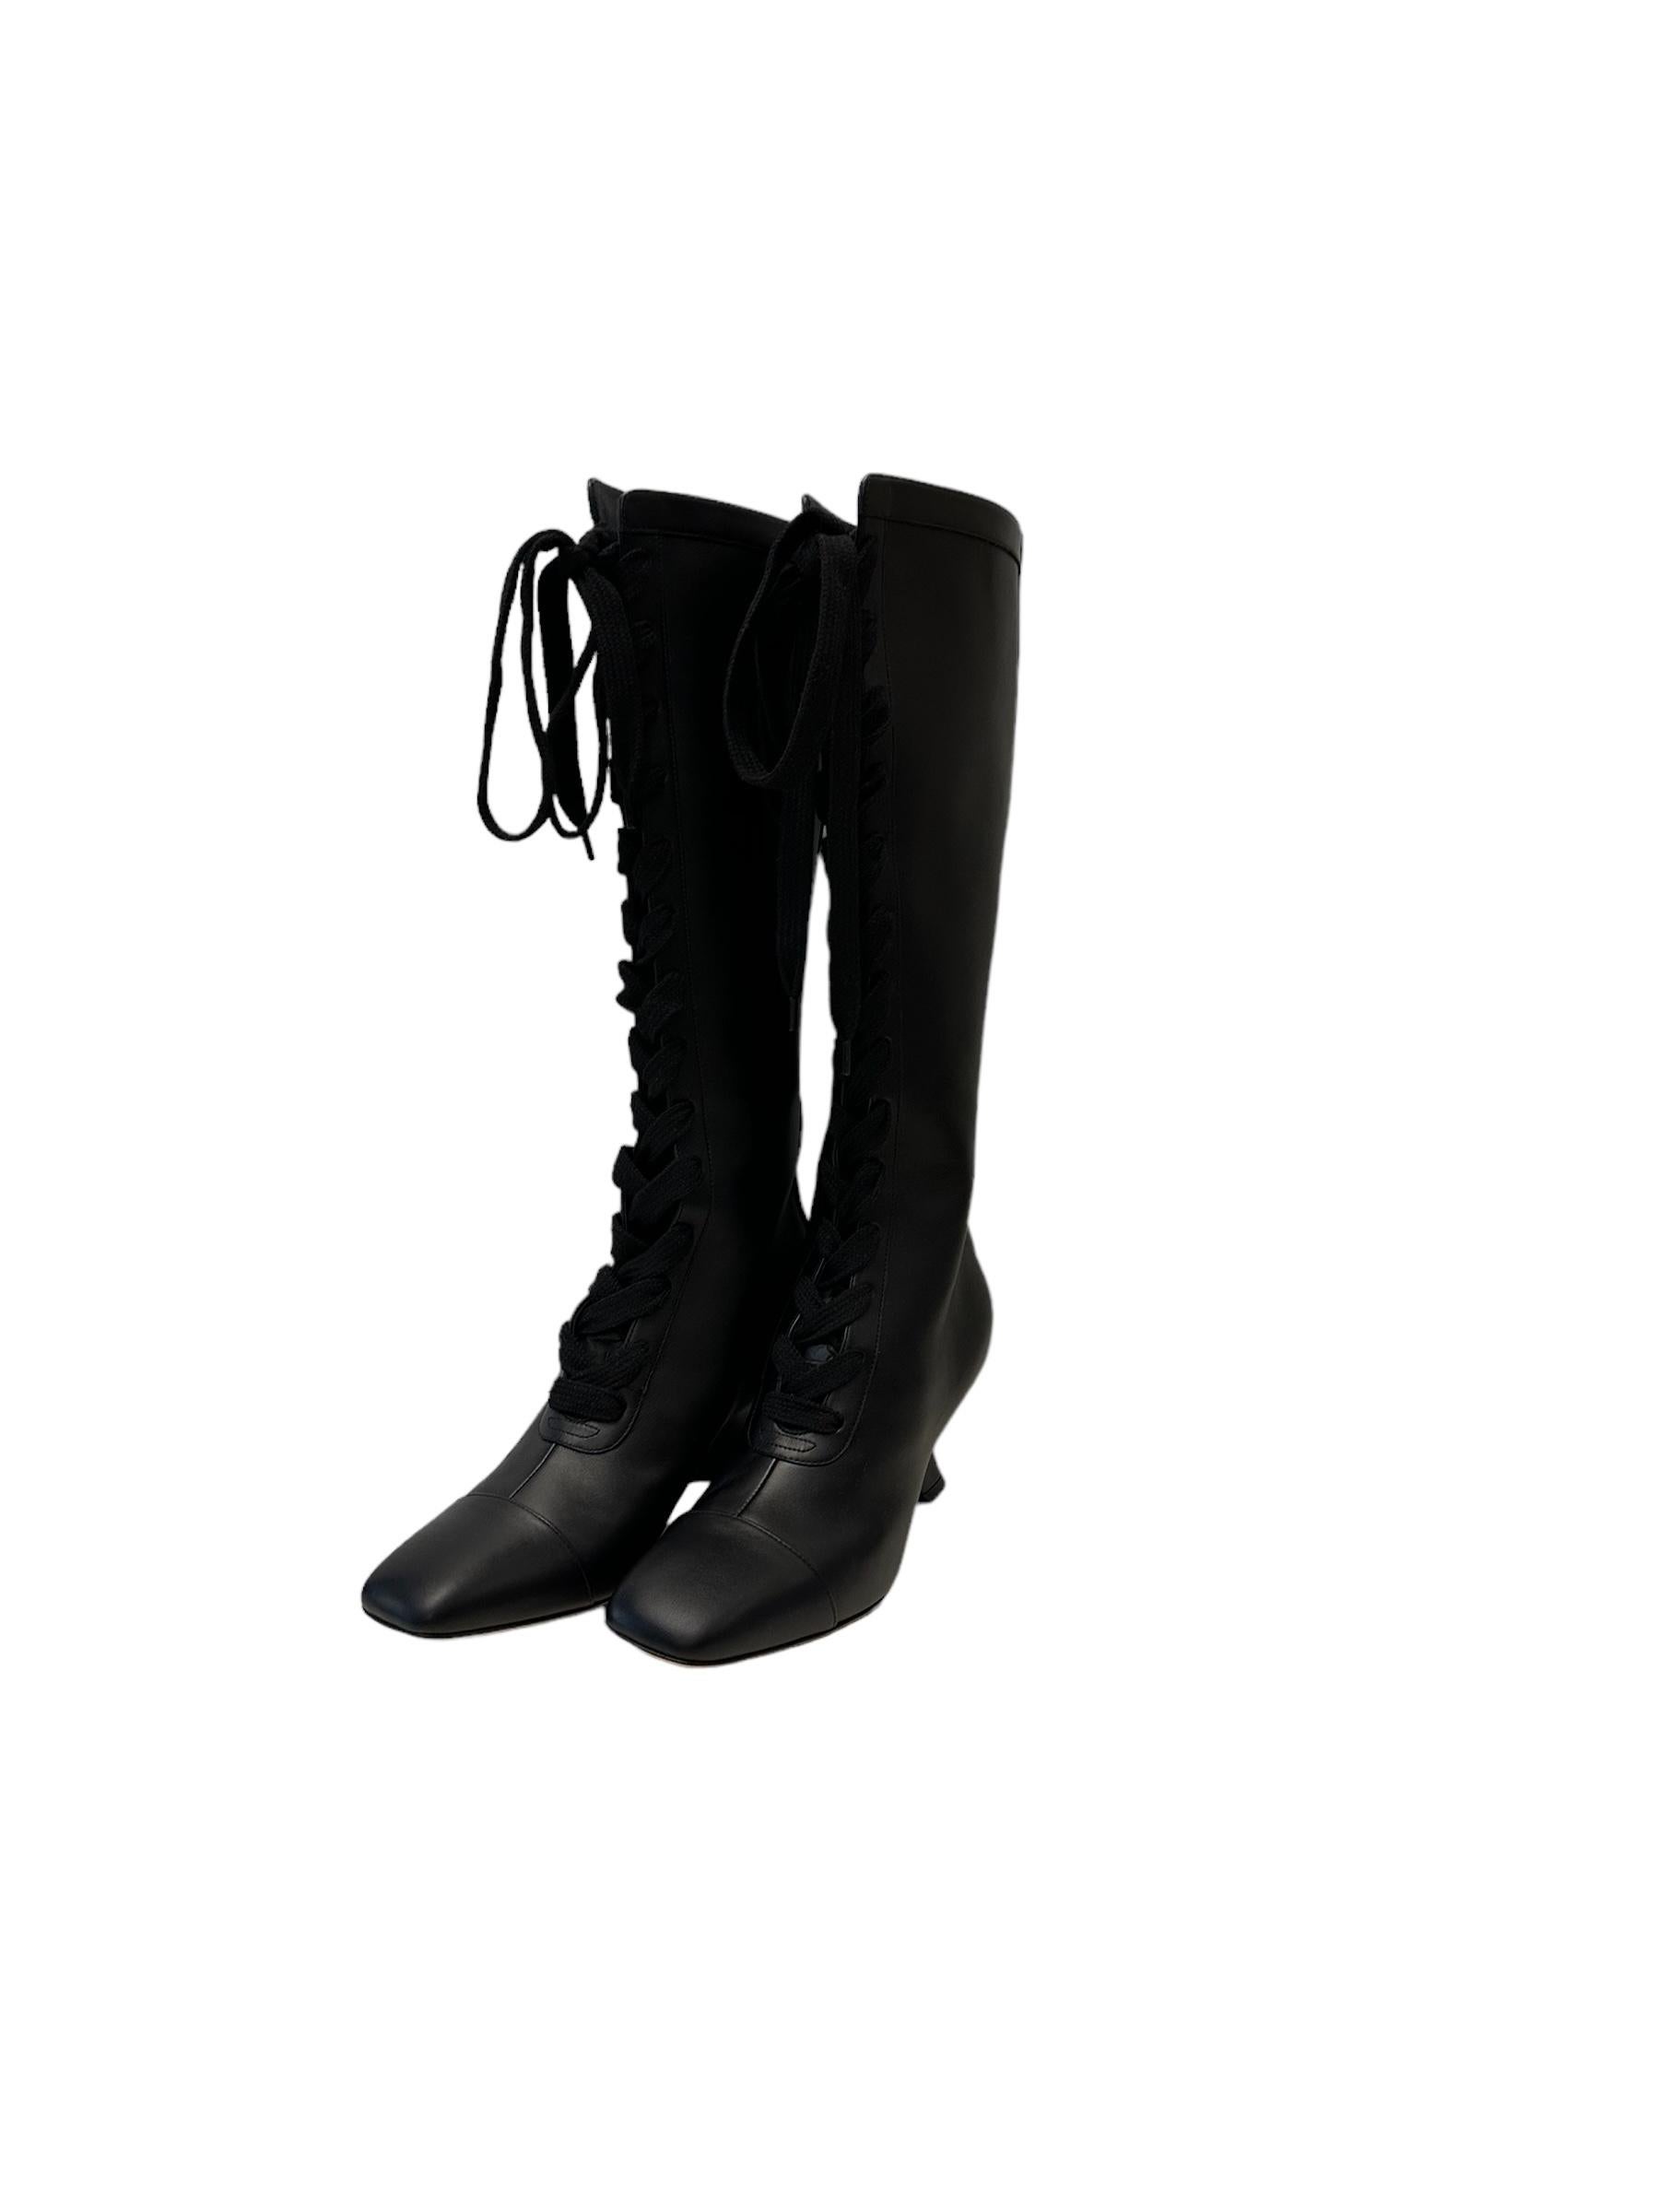 Christian Dior New Cruise 2024 Naughtily-D Wedge Black Boots For Sale 8